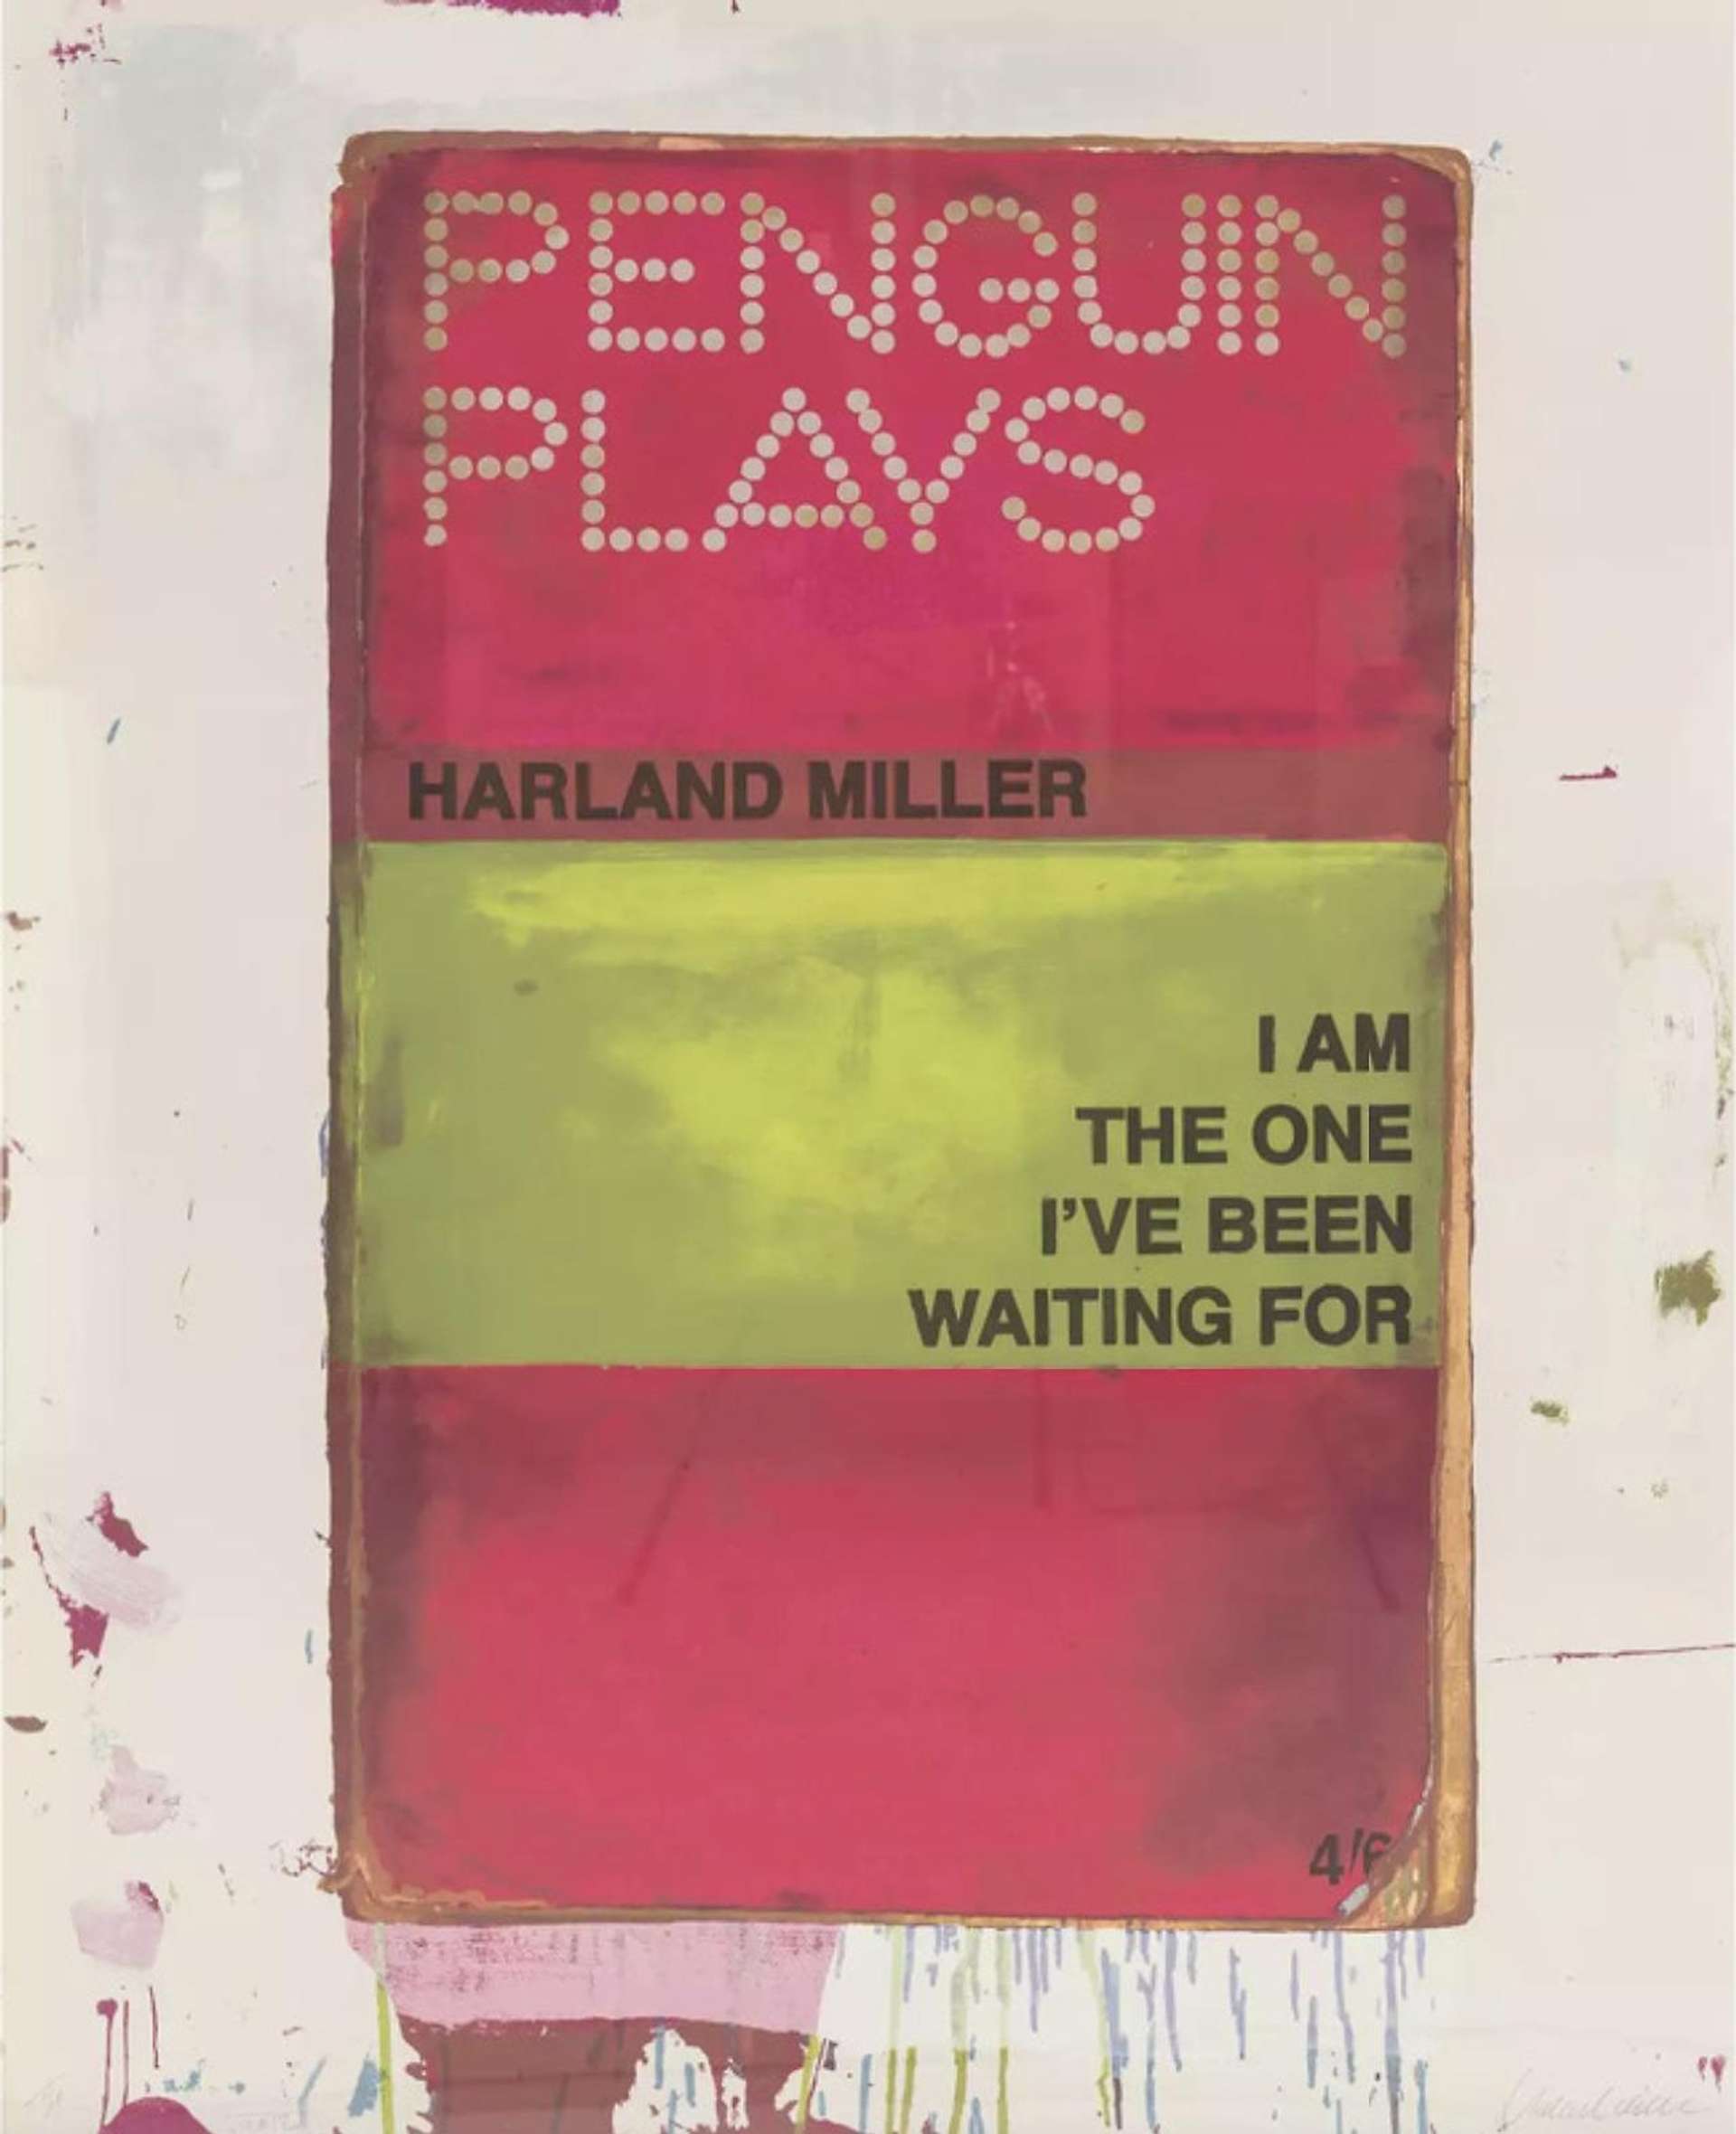 I Am The One I've Been Waiting For (red and yellow) by Harland Miller